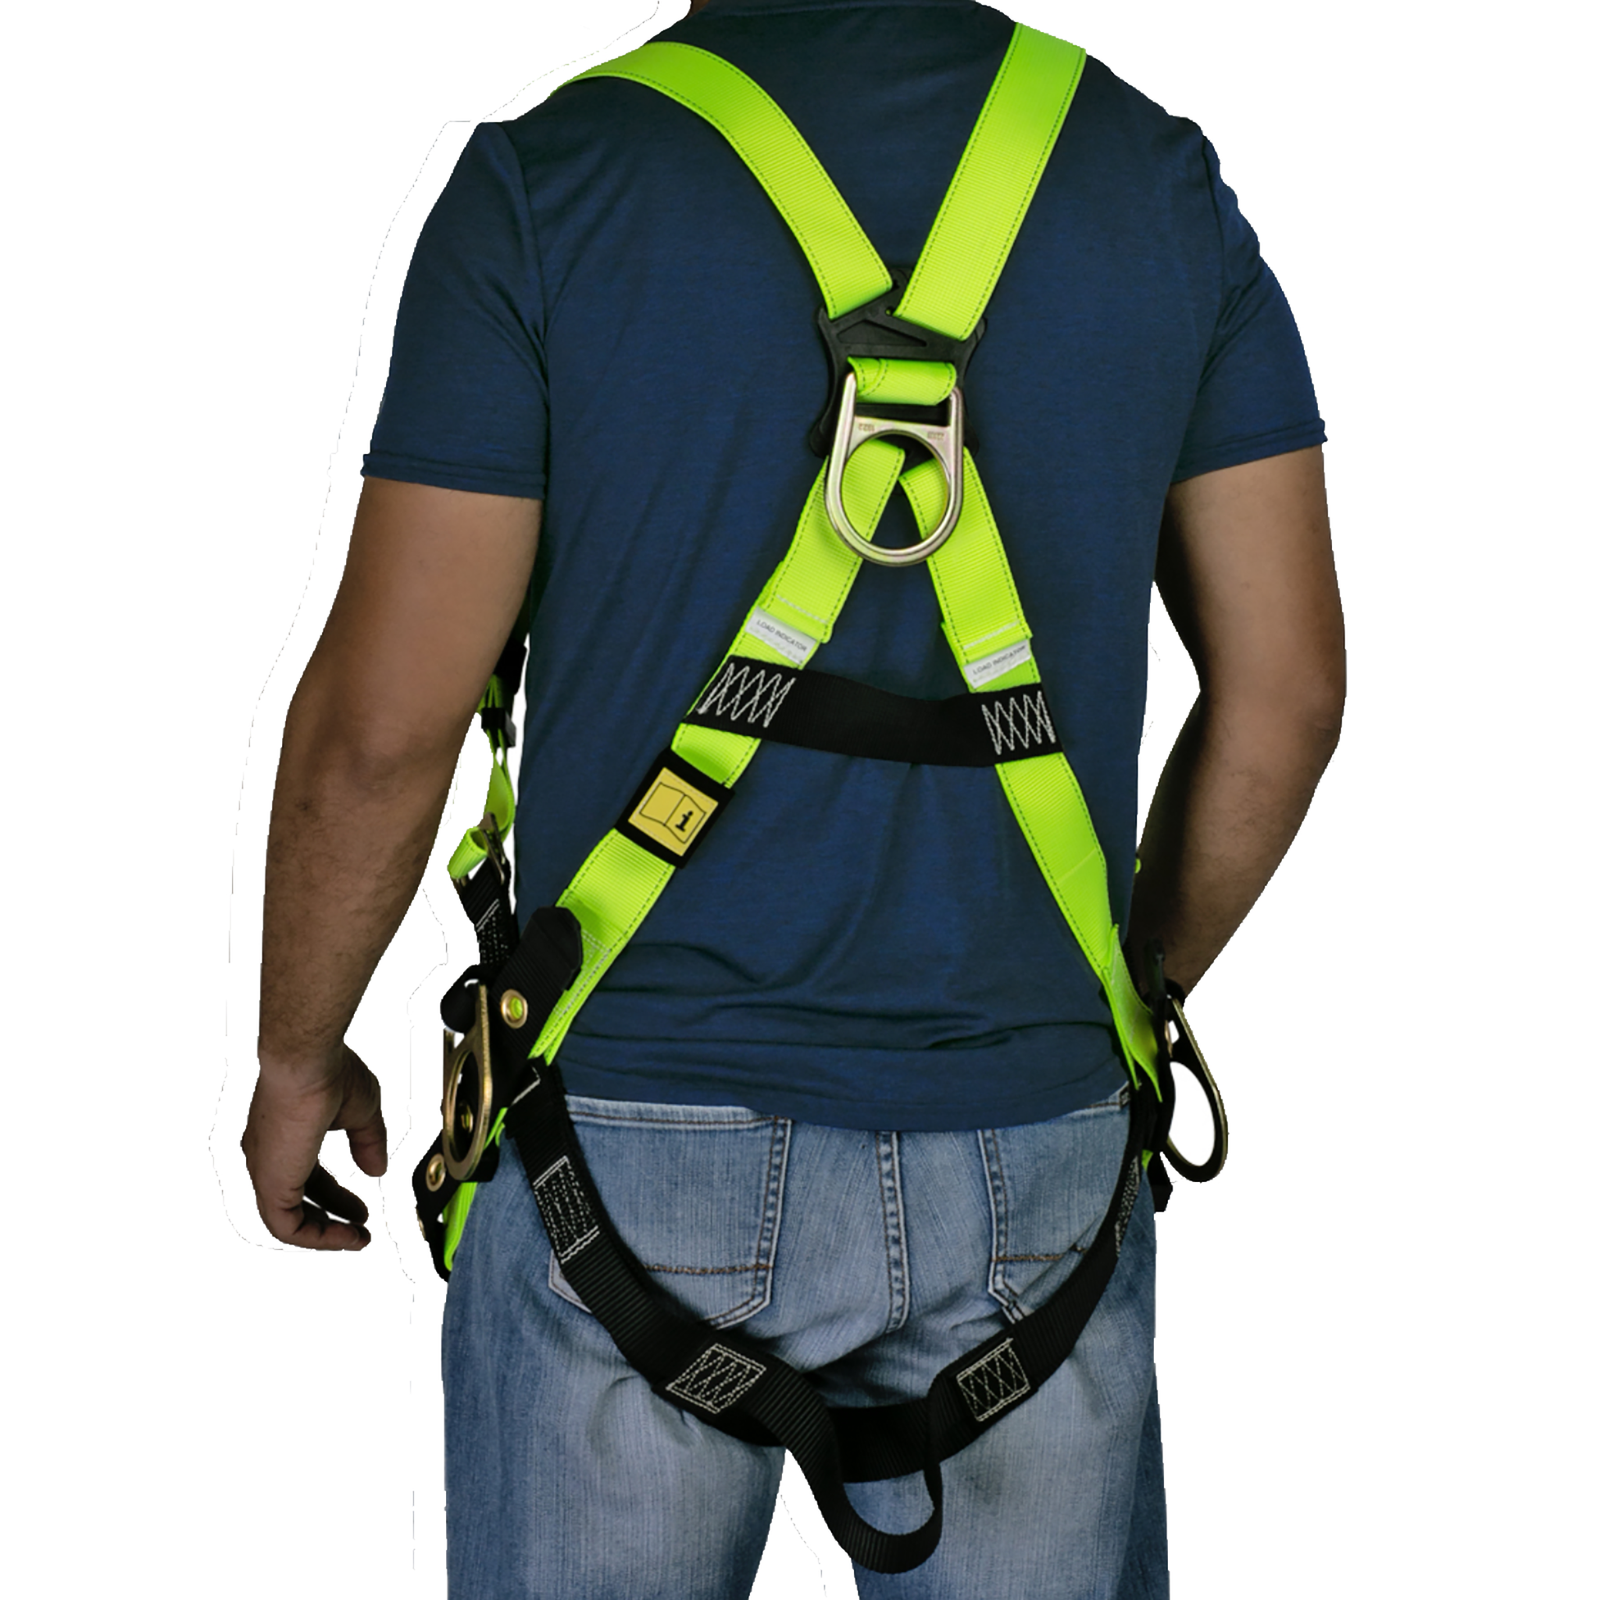 A person wearing the 3D fall protection safety body JORESTECH harness with grommets.  All 3 heavy duty metal D are visible. One is located in the middle of the persons back and the other two are on left and right side of the persons at hip level.